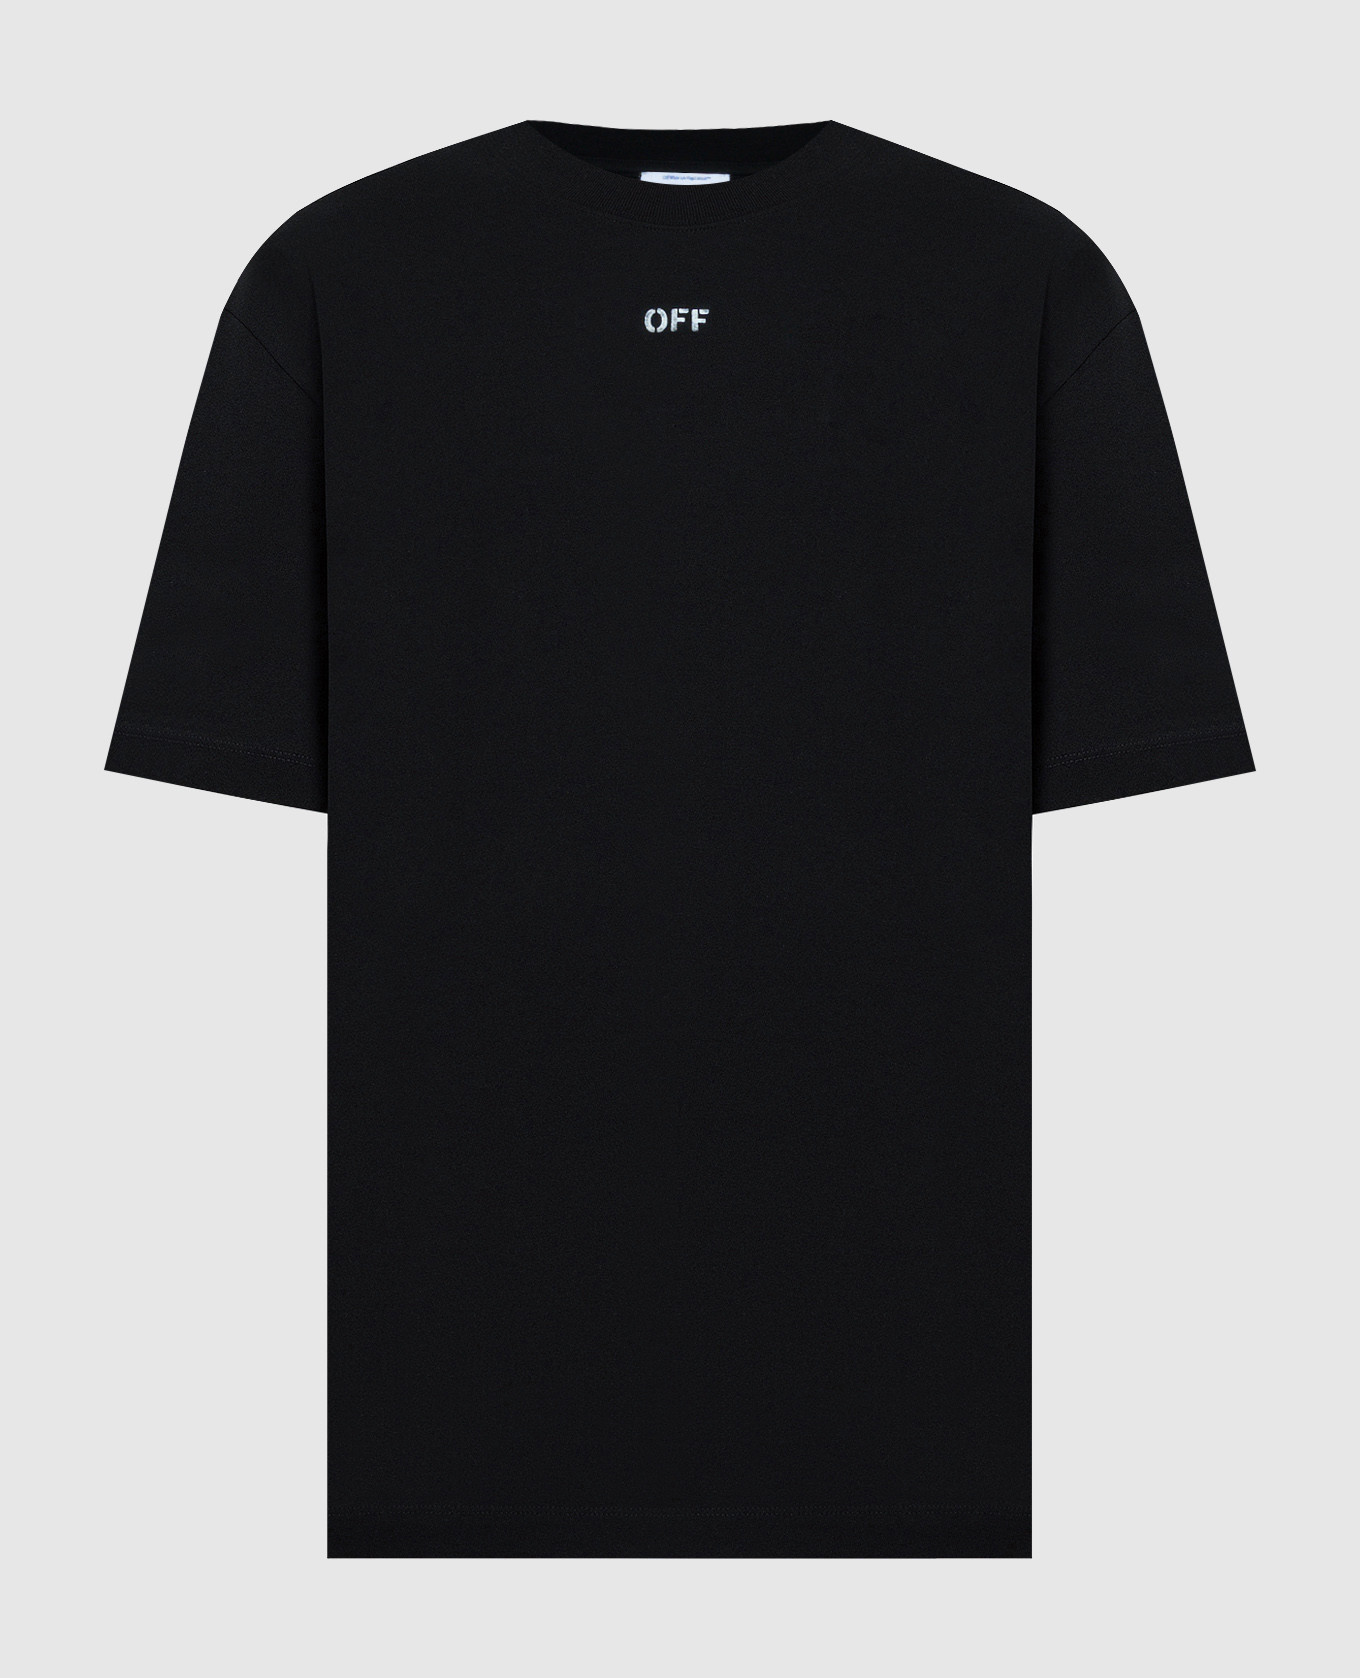 Black t-shirt with textured embroidery